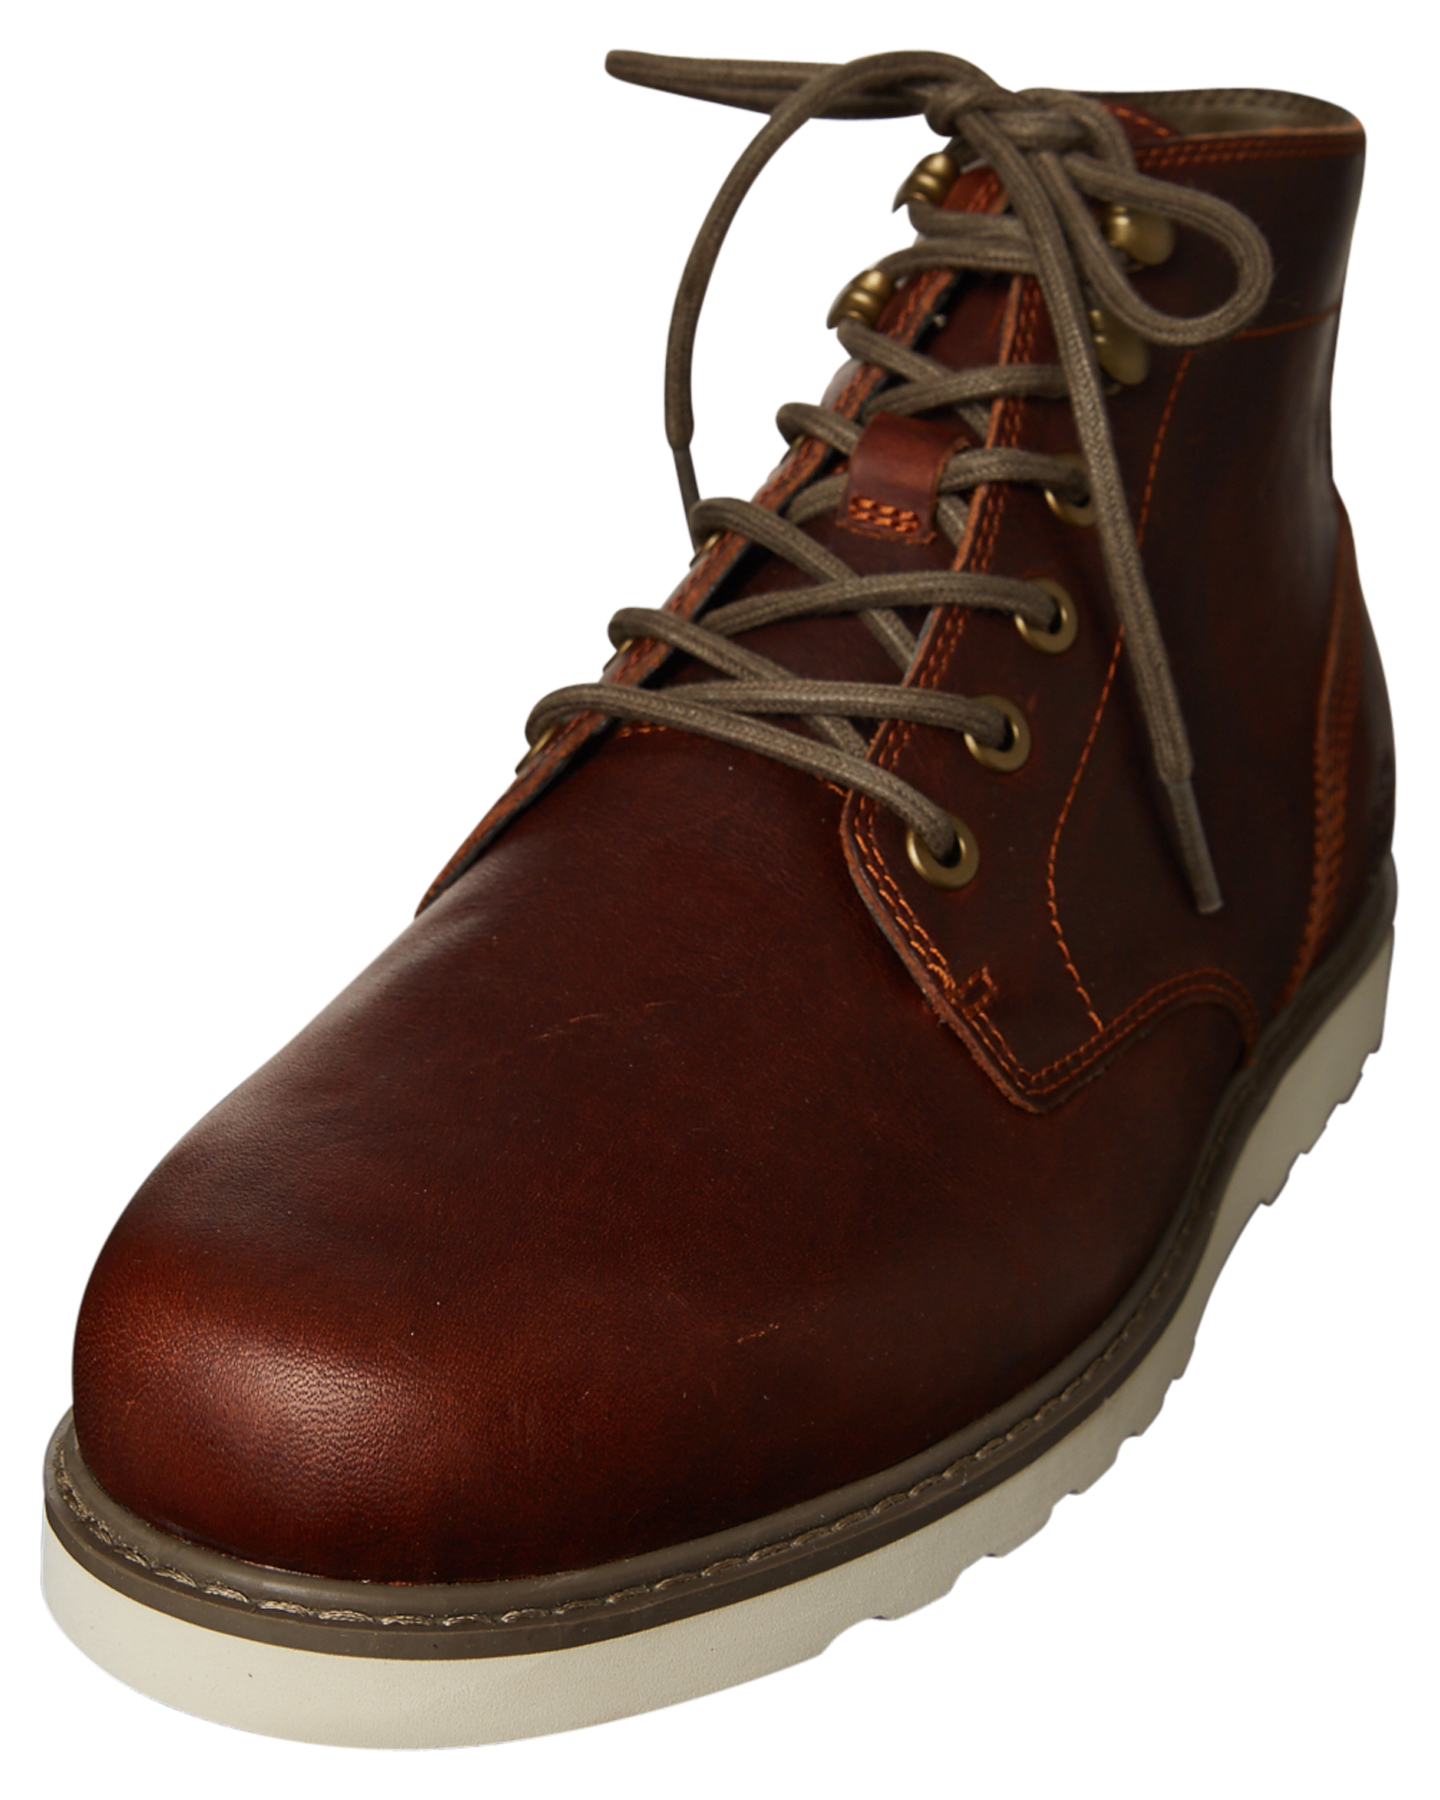 Problem recognition of buying a timberland boot